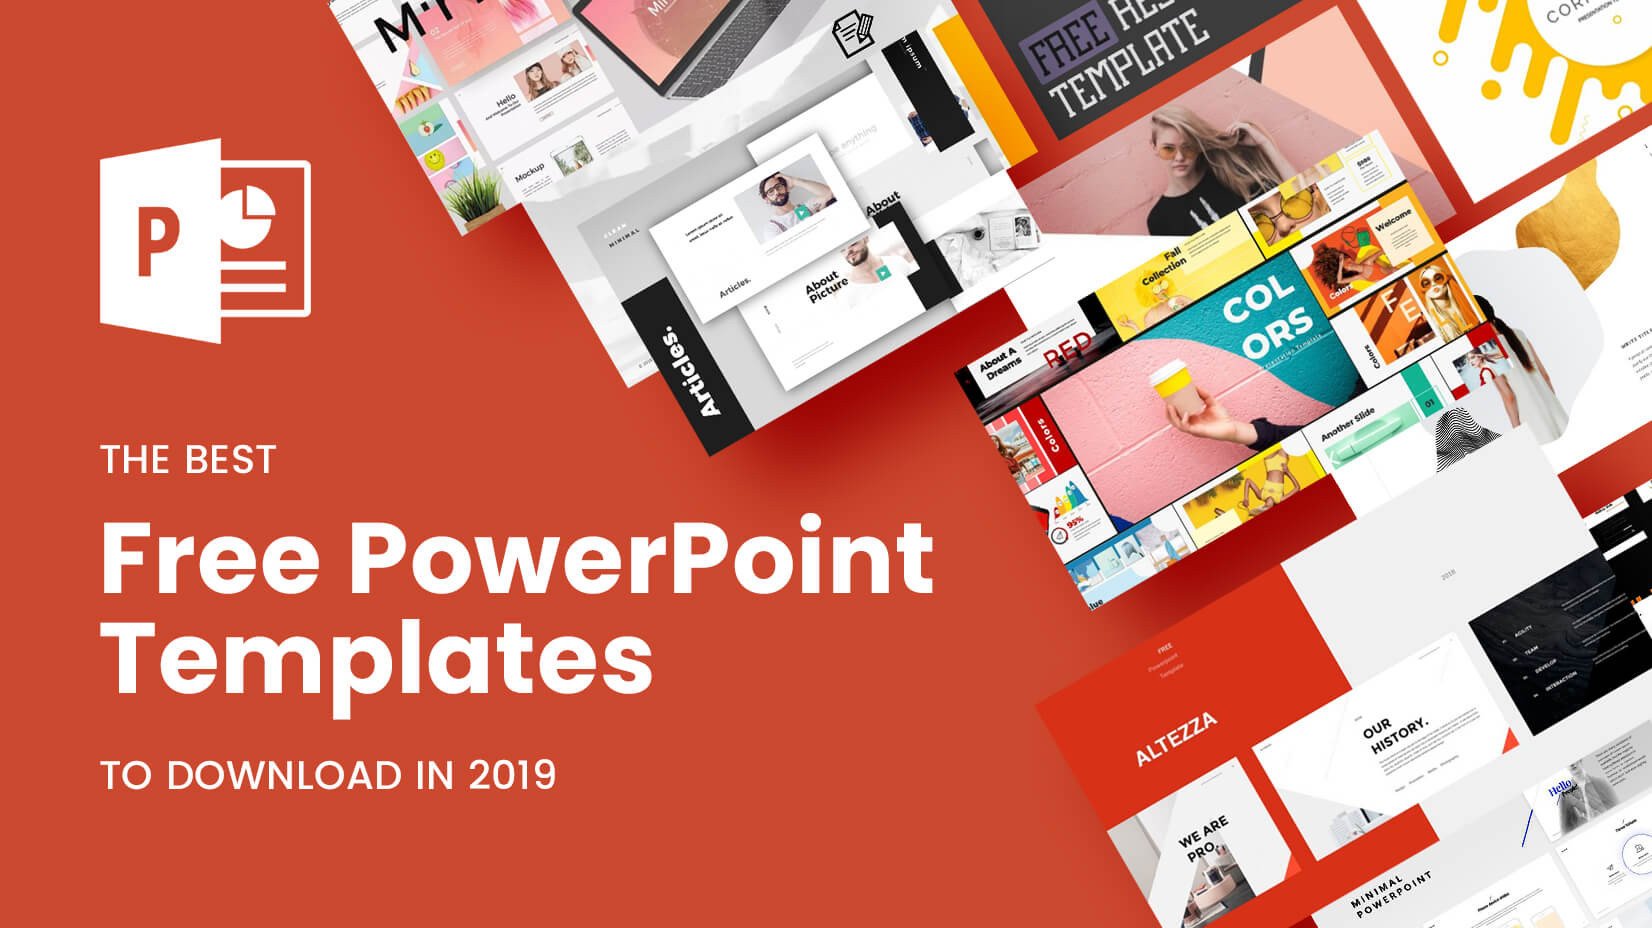 The Best Free PowerPoint Templates to Download in 2019